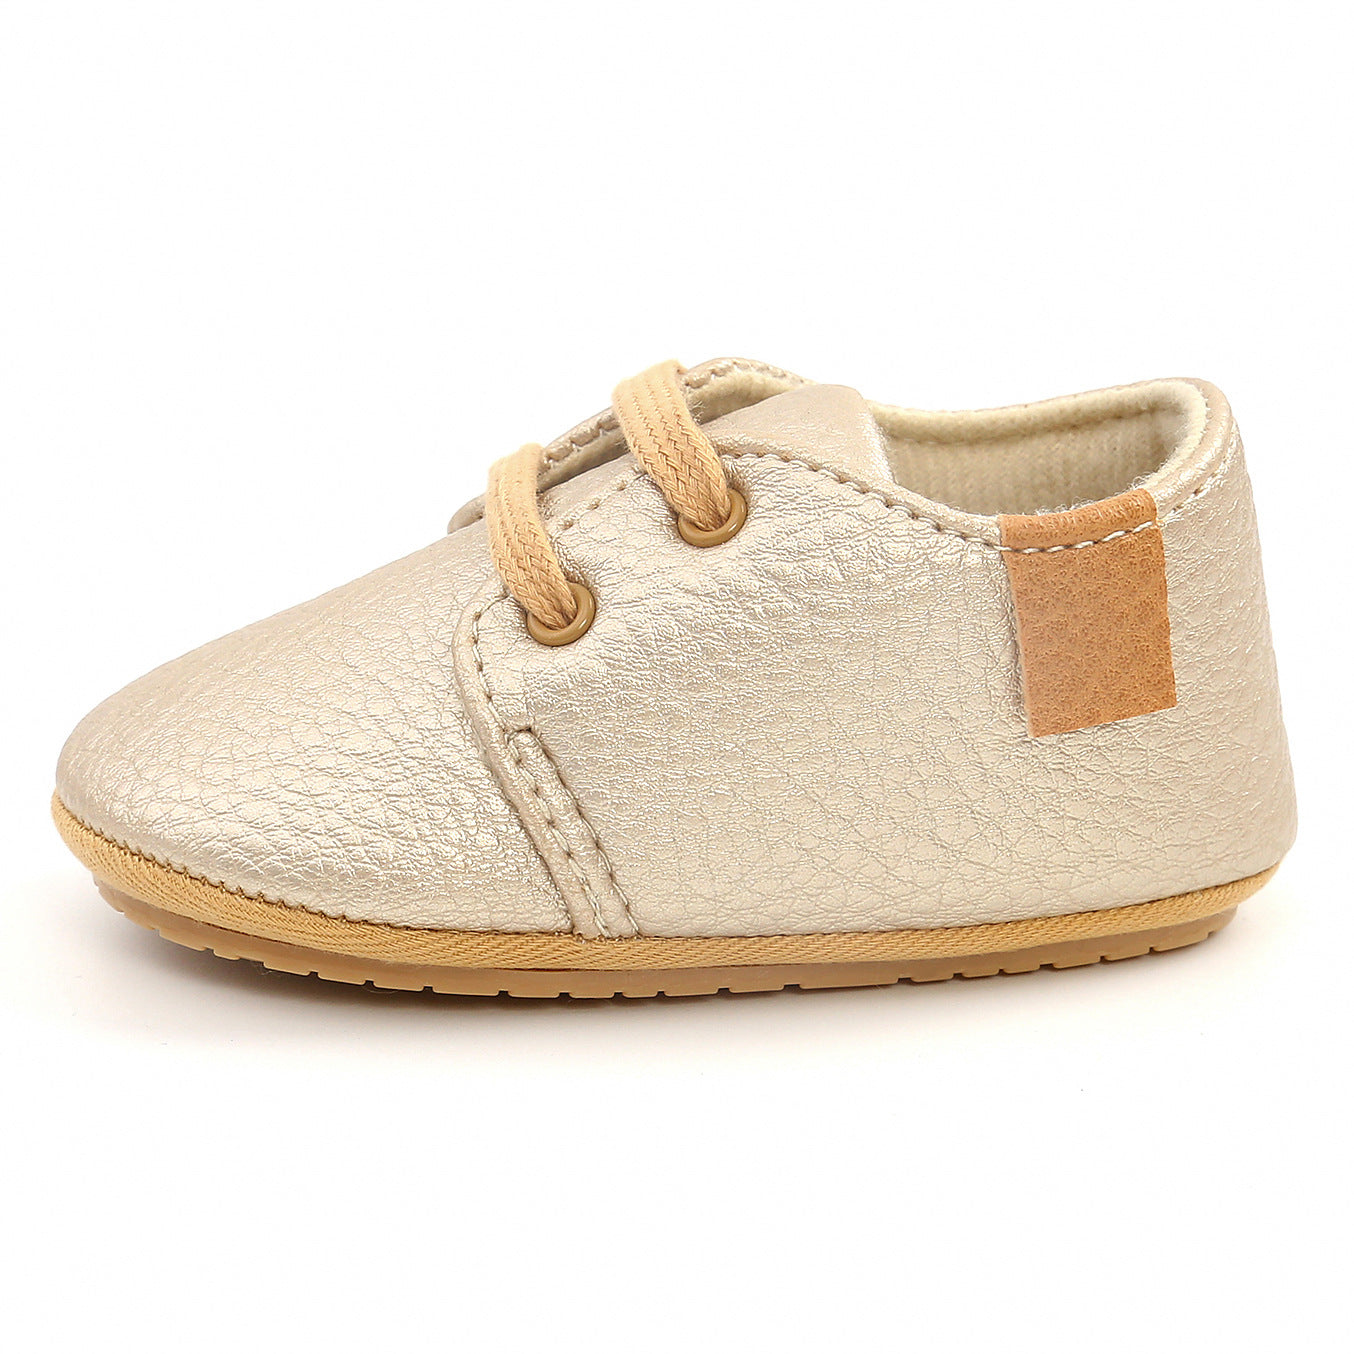 ﻿Luxury Soft Leather Baby Moccasins Shoes Newborn Rubber Toddler Shoes